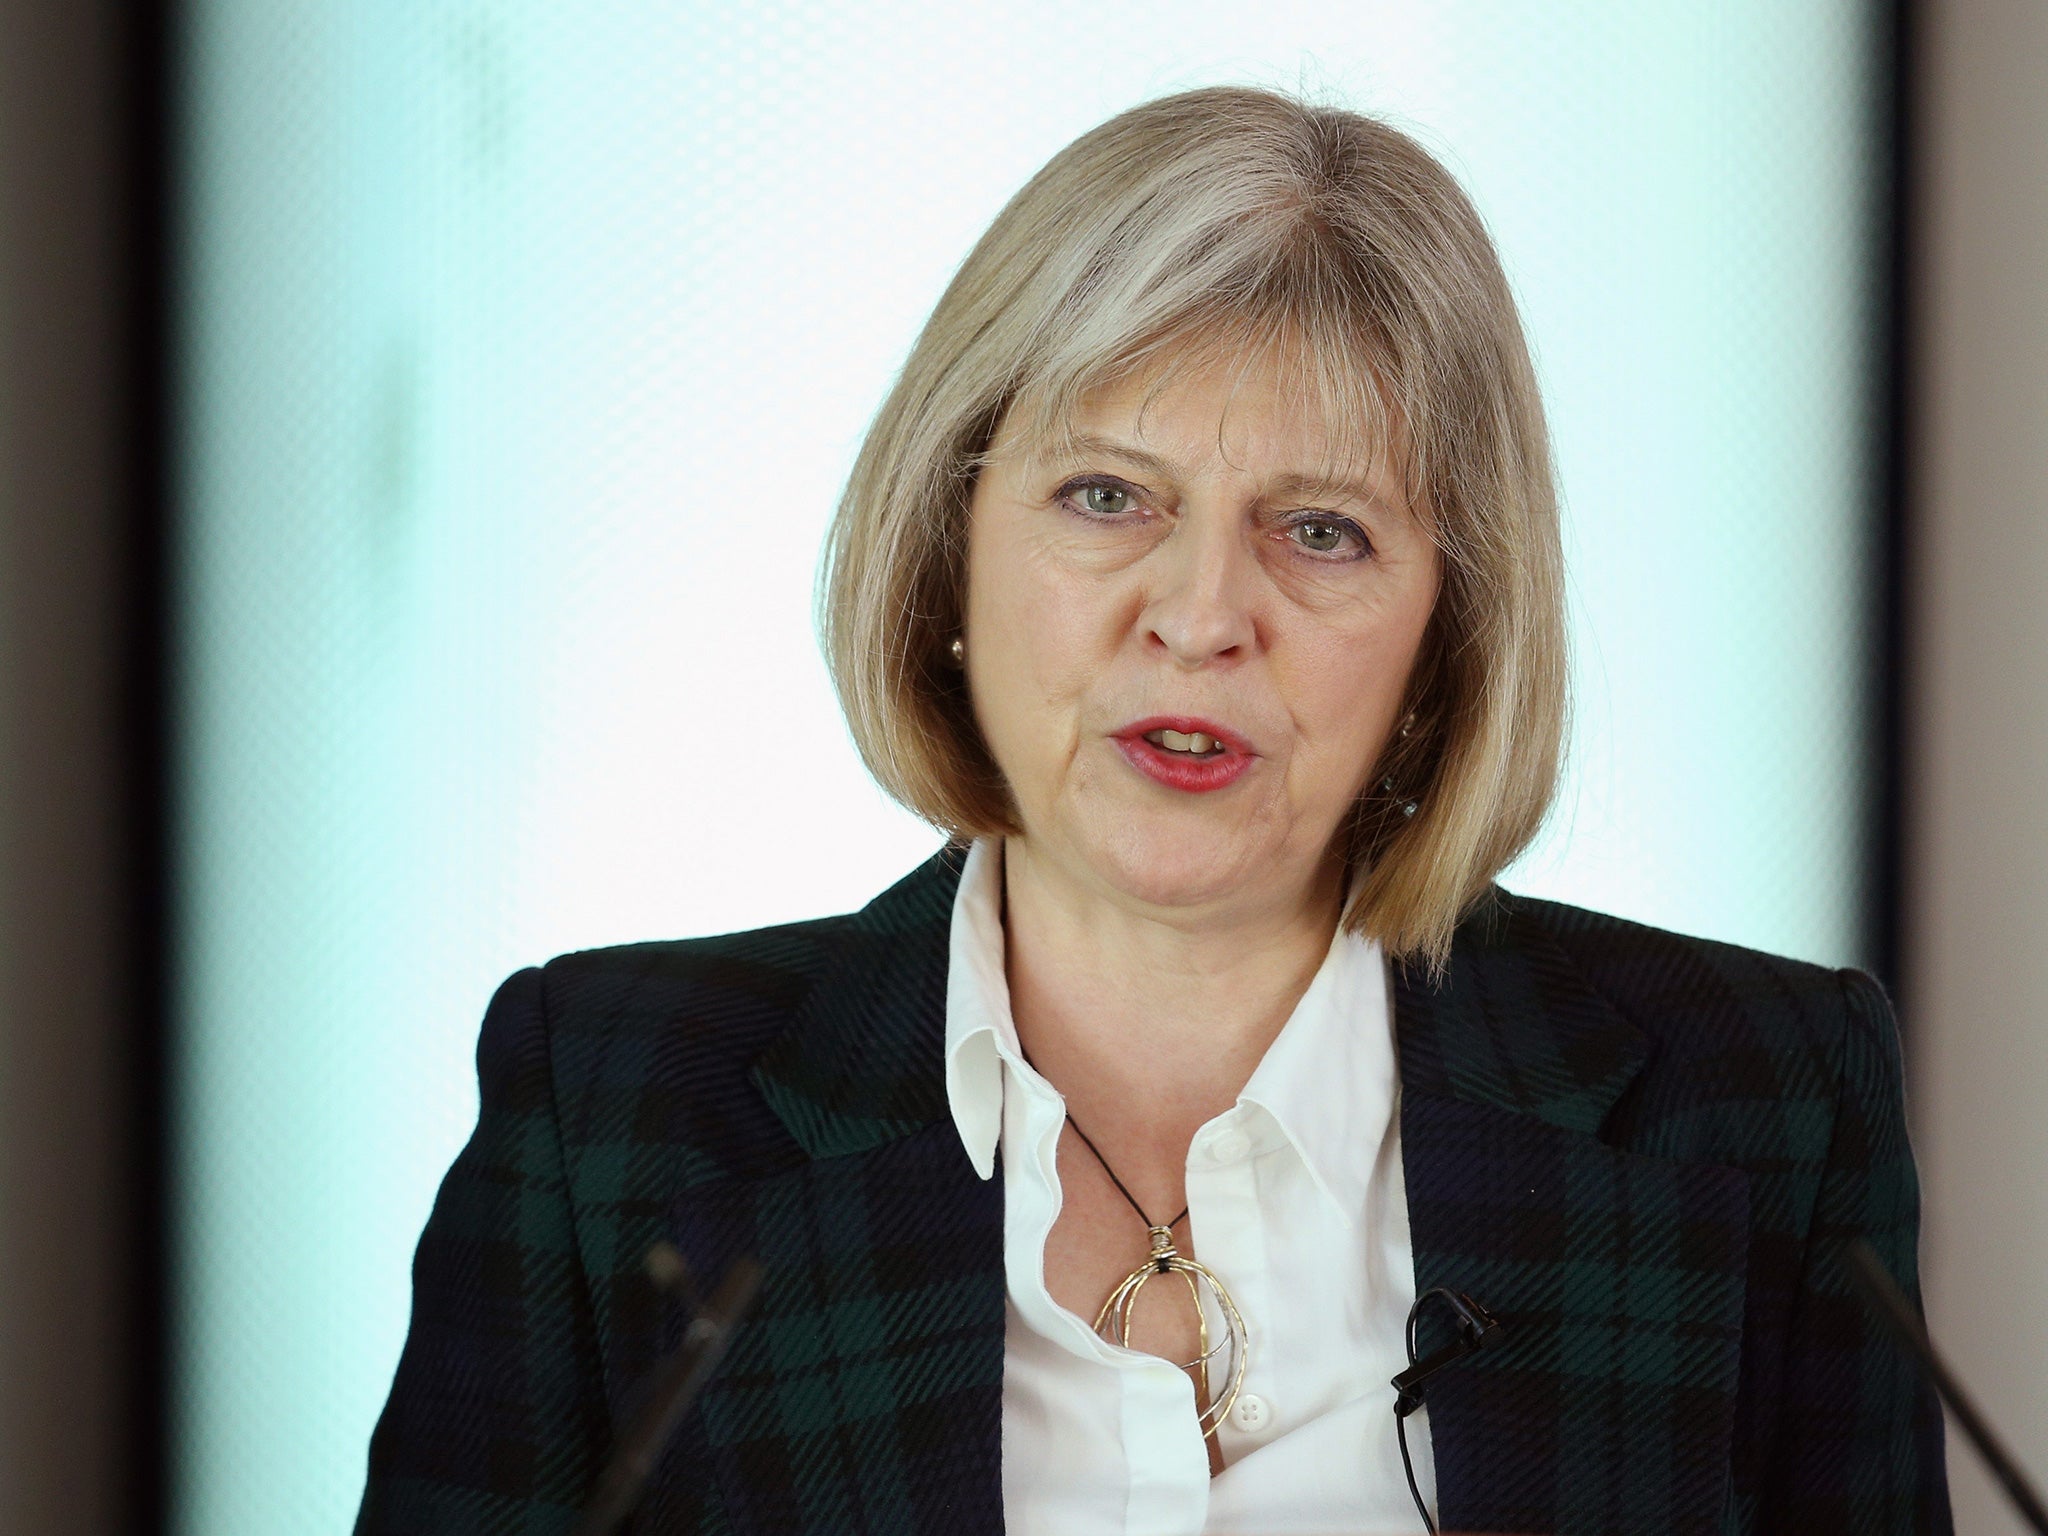 Theresa May has led the Government's plans to crack down on encryption and other security measures